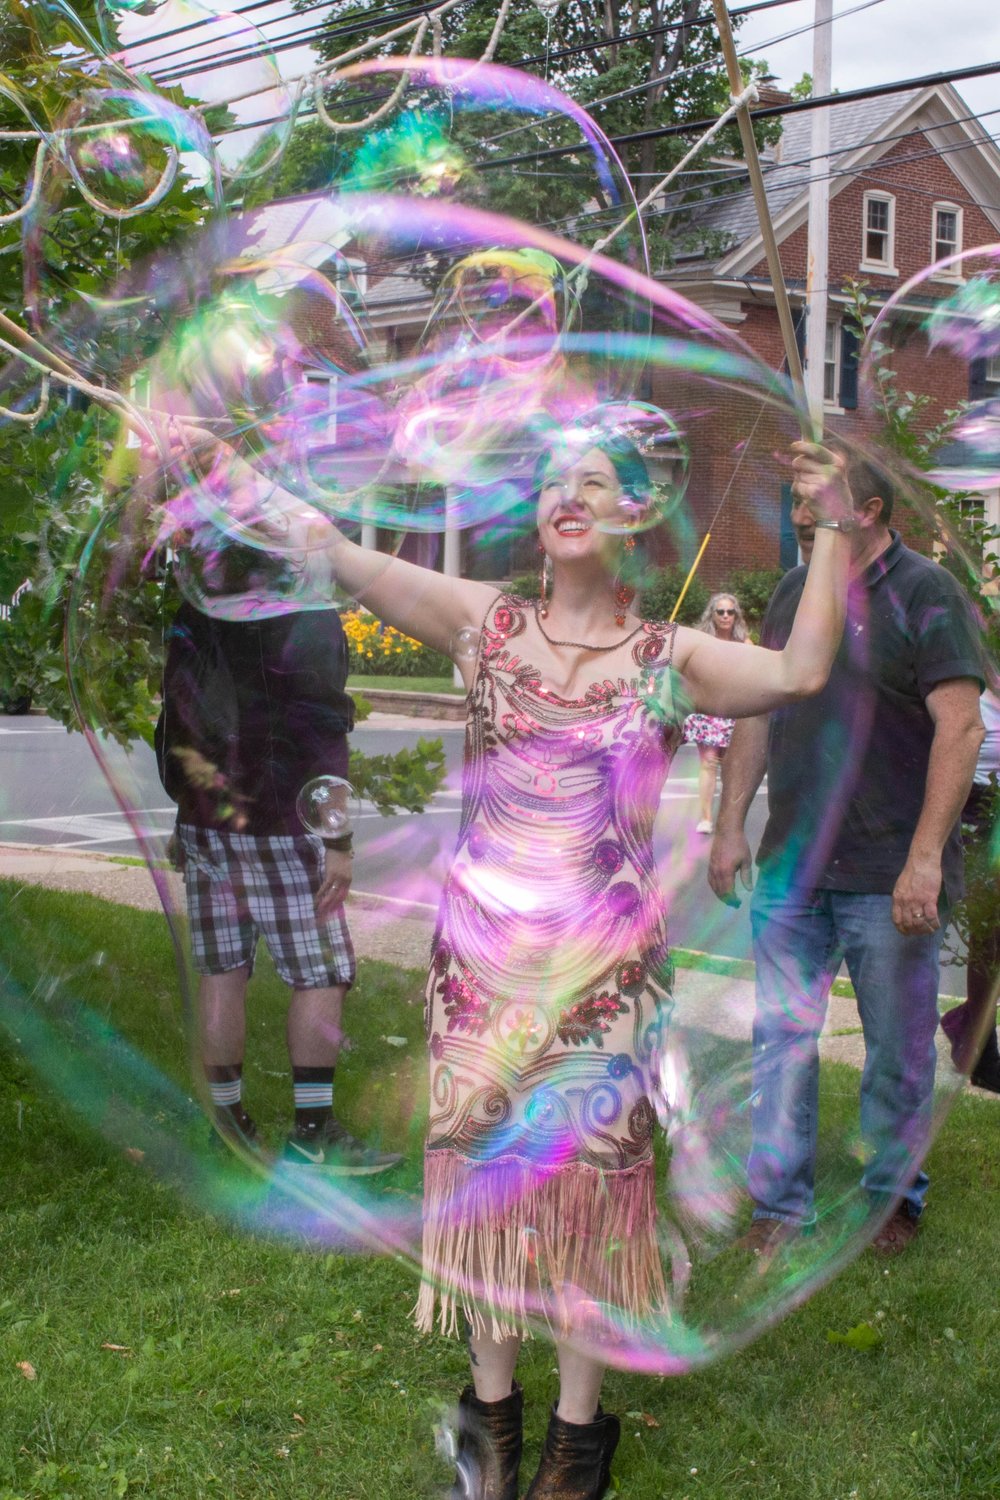 “Bubble Witch” Lindsey Noel entertains.